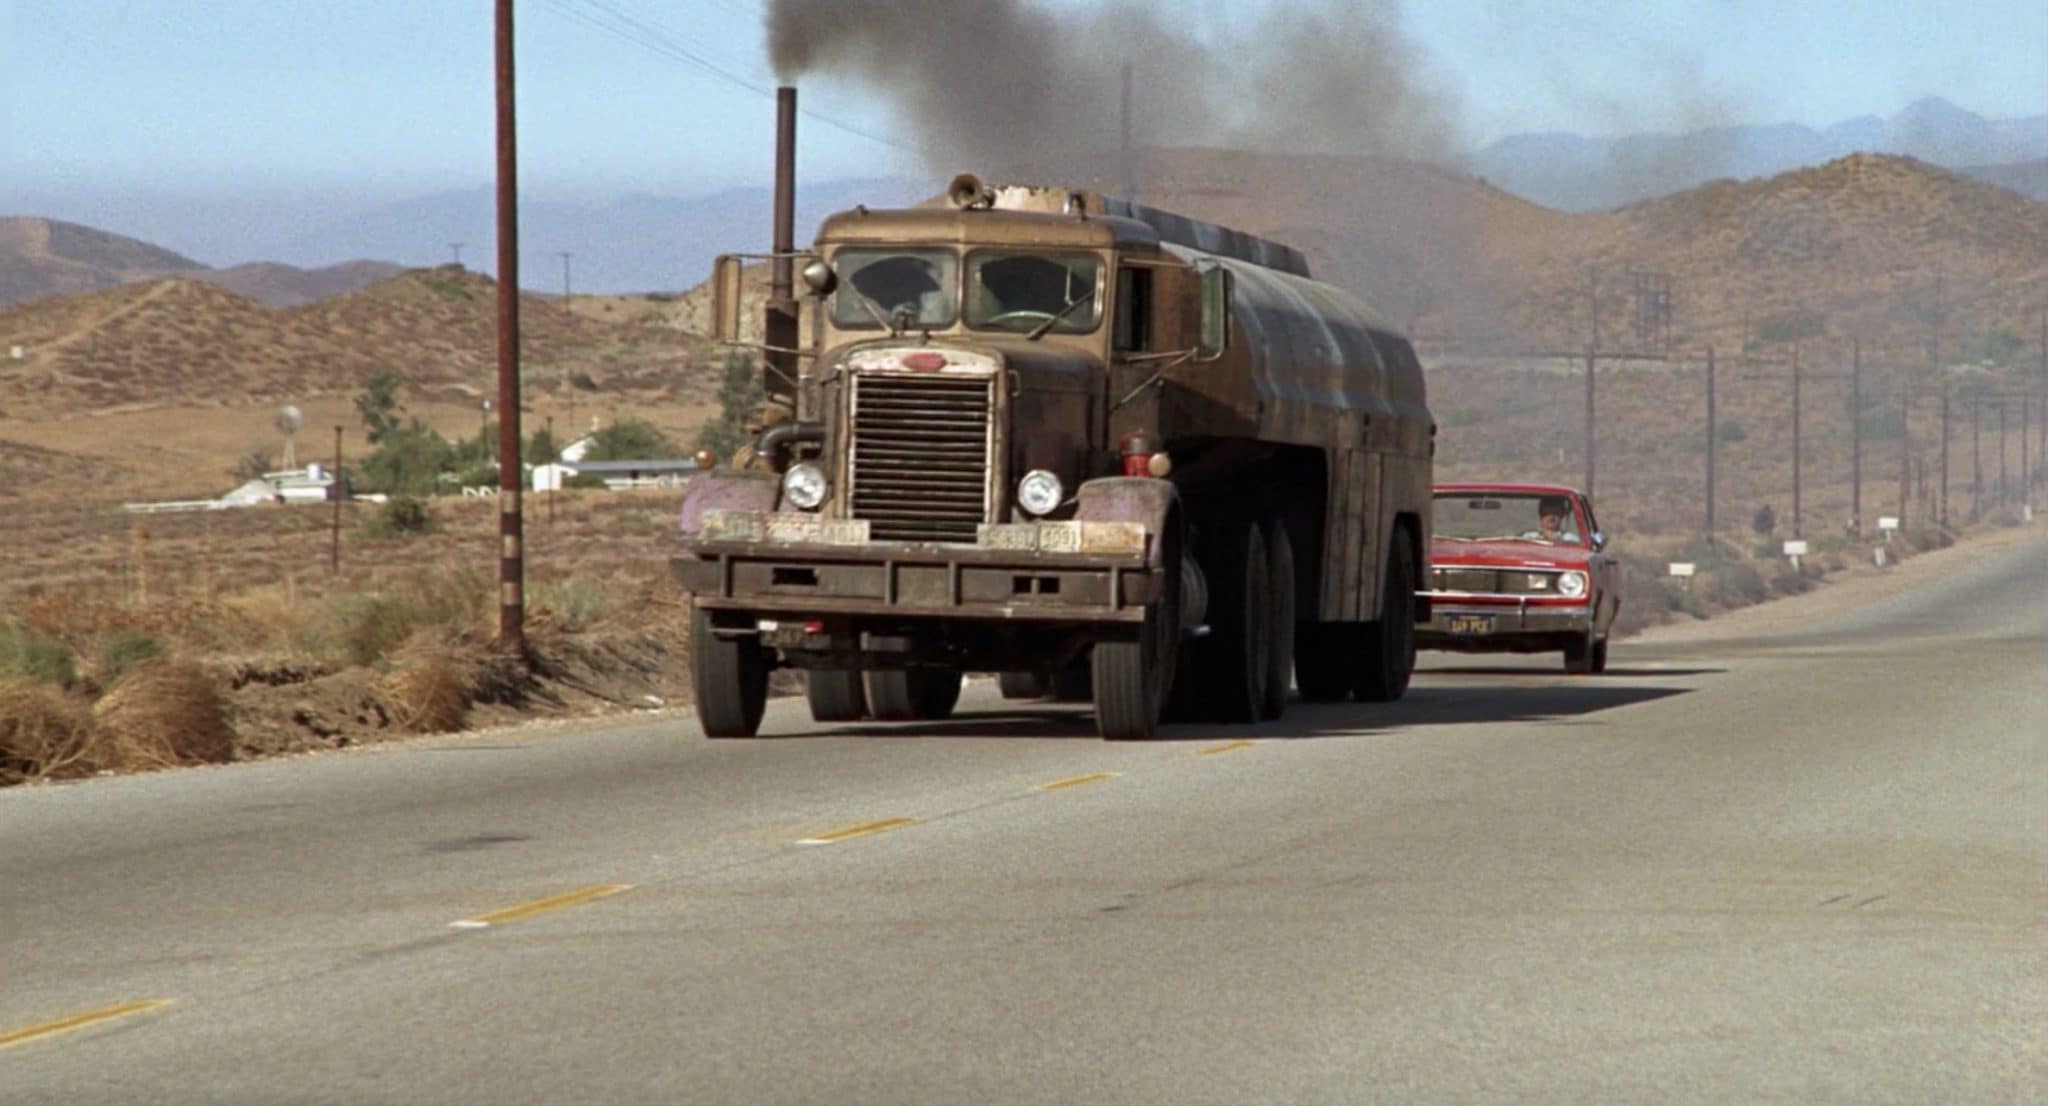 An image from the movie Duel, directed by Steven Spielberg